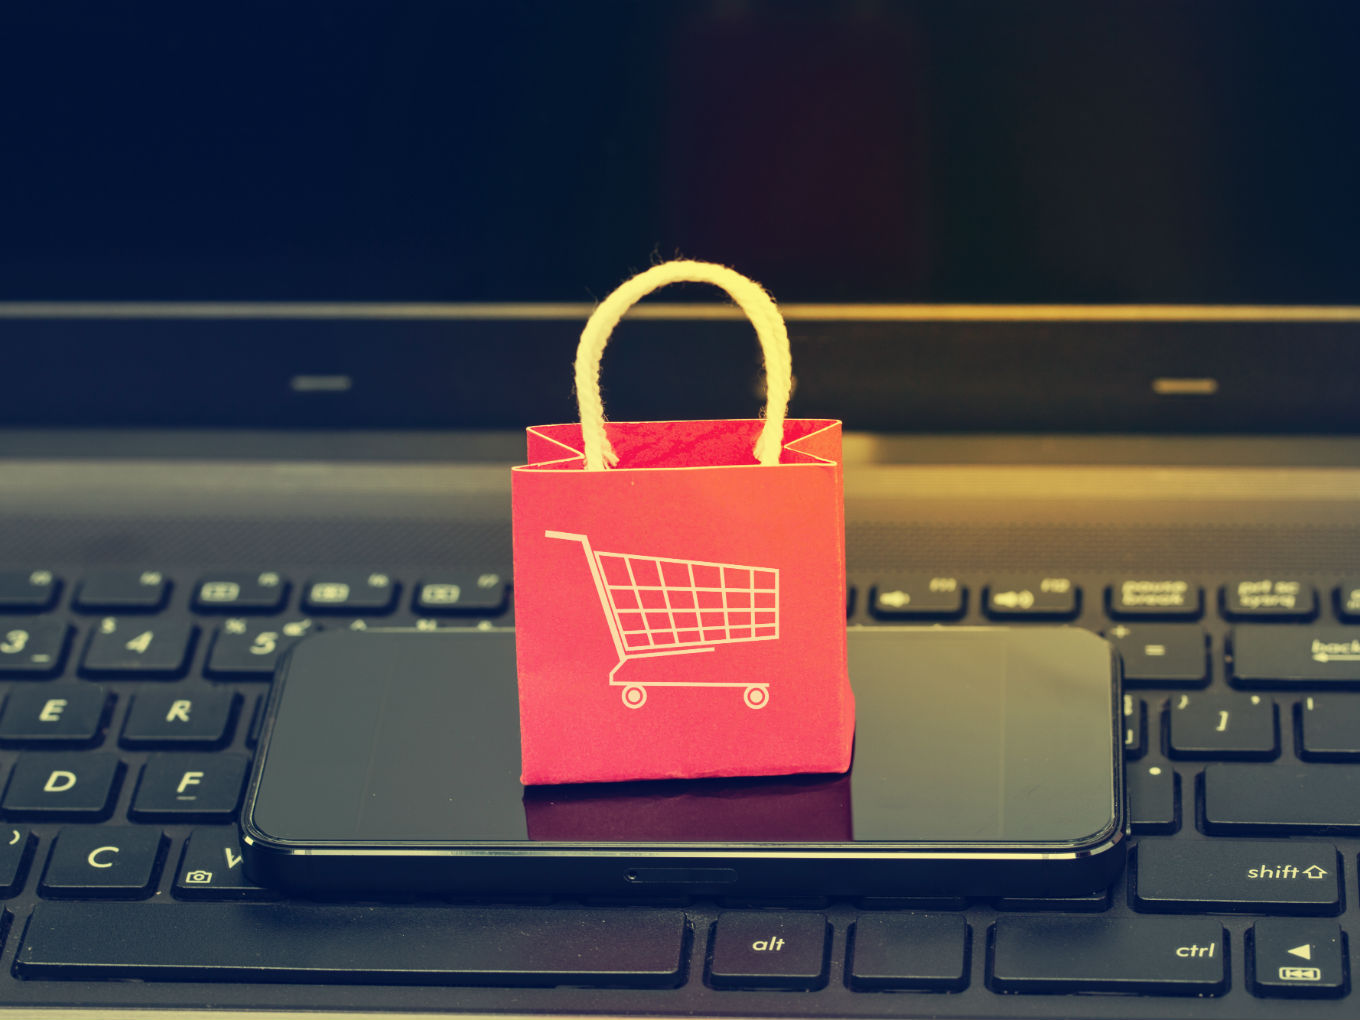 Draft National Ecommerce Policy To Deal With Counterfeits: Report